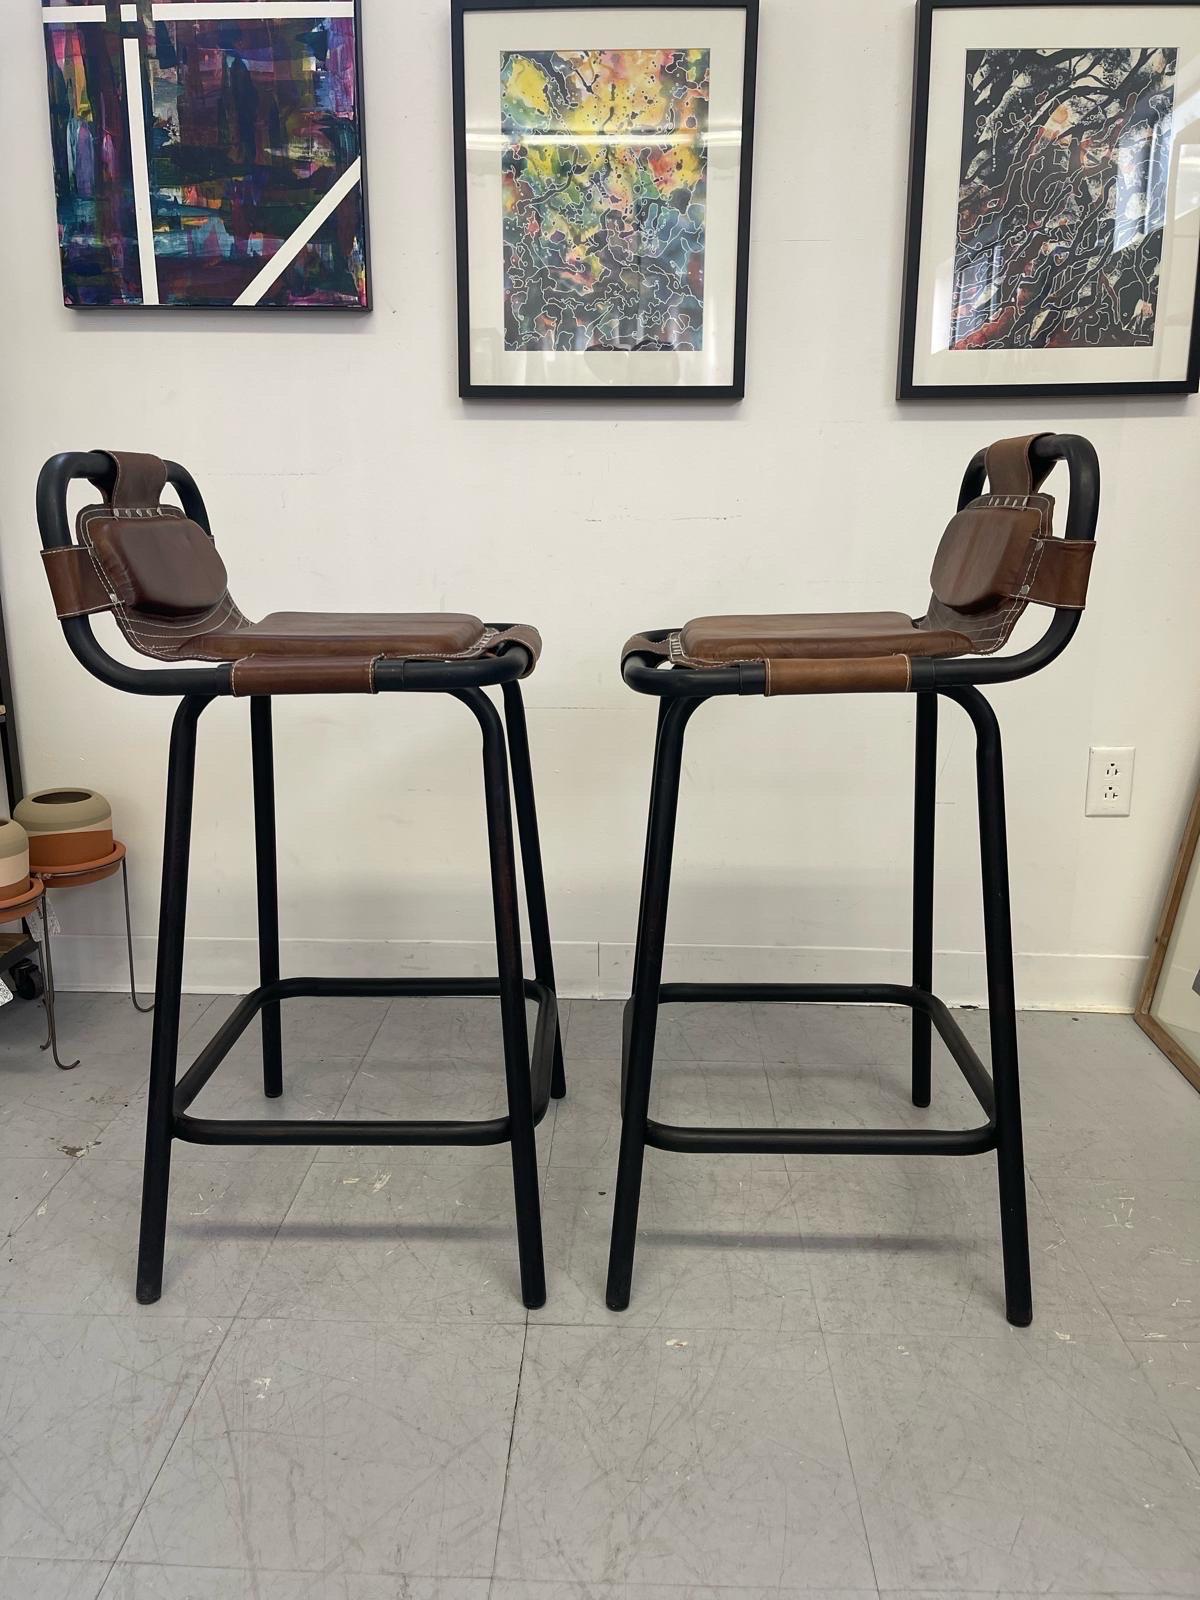 Late 20th Century Vintage Bar Stools With Leather Seats and Black Metal Frame. 2 Available.$295/E For Sale